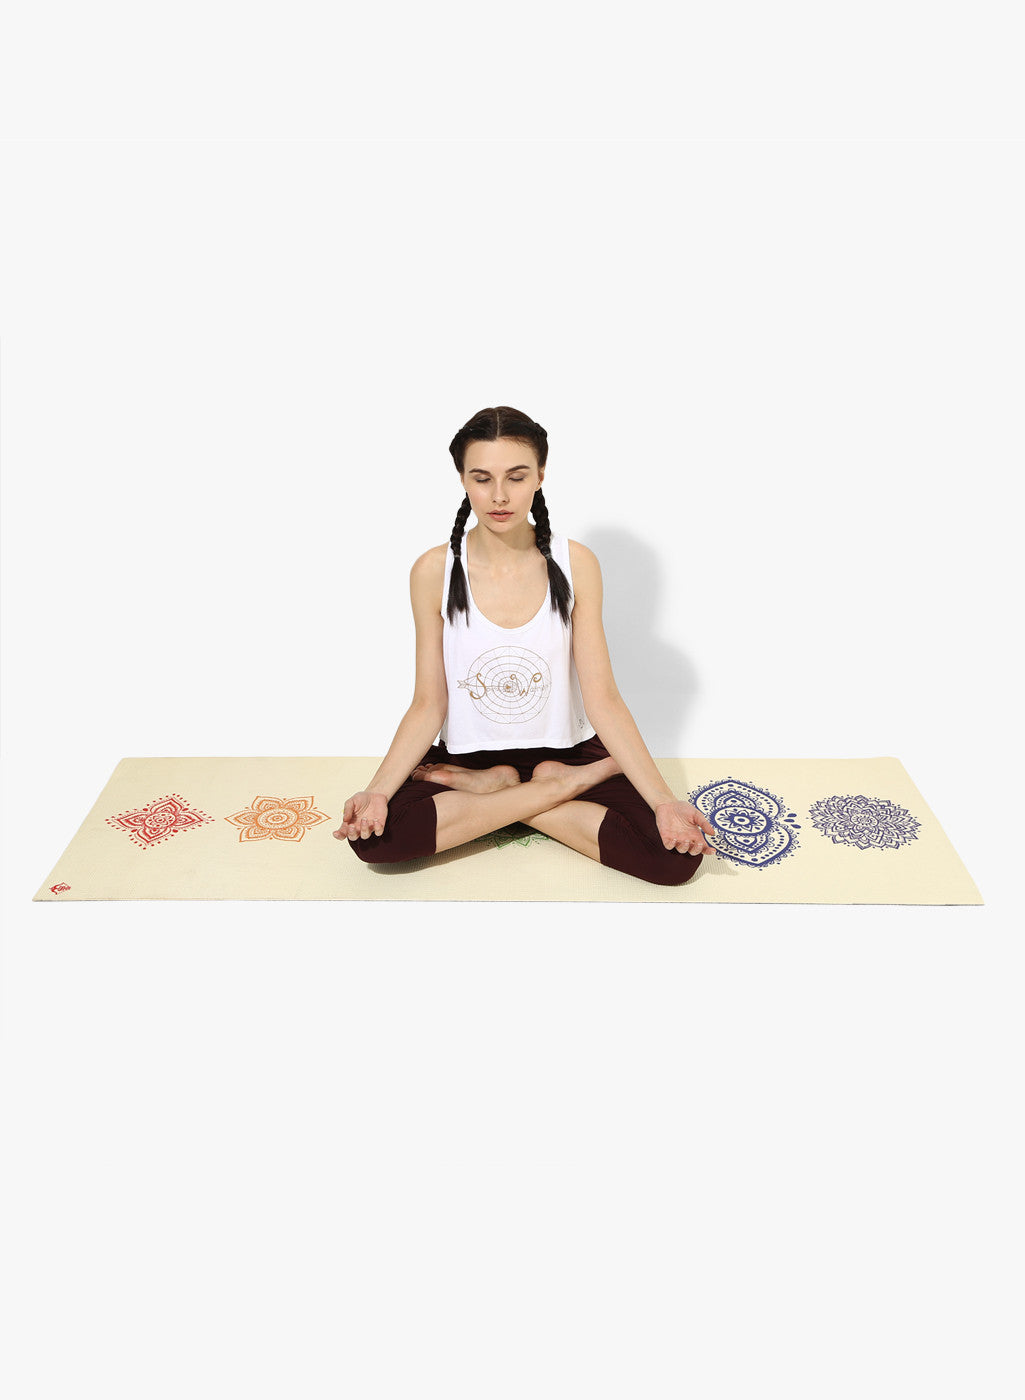 Spiritual Warrior's eco-friendly yoga mats have great grip, anti-slip, good cushioning for the knees, high quality, portable, affordable with Chakra print